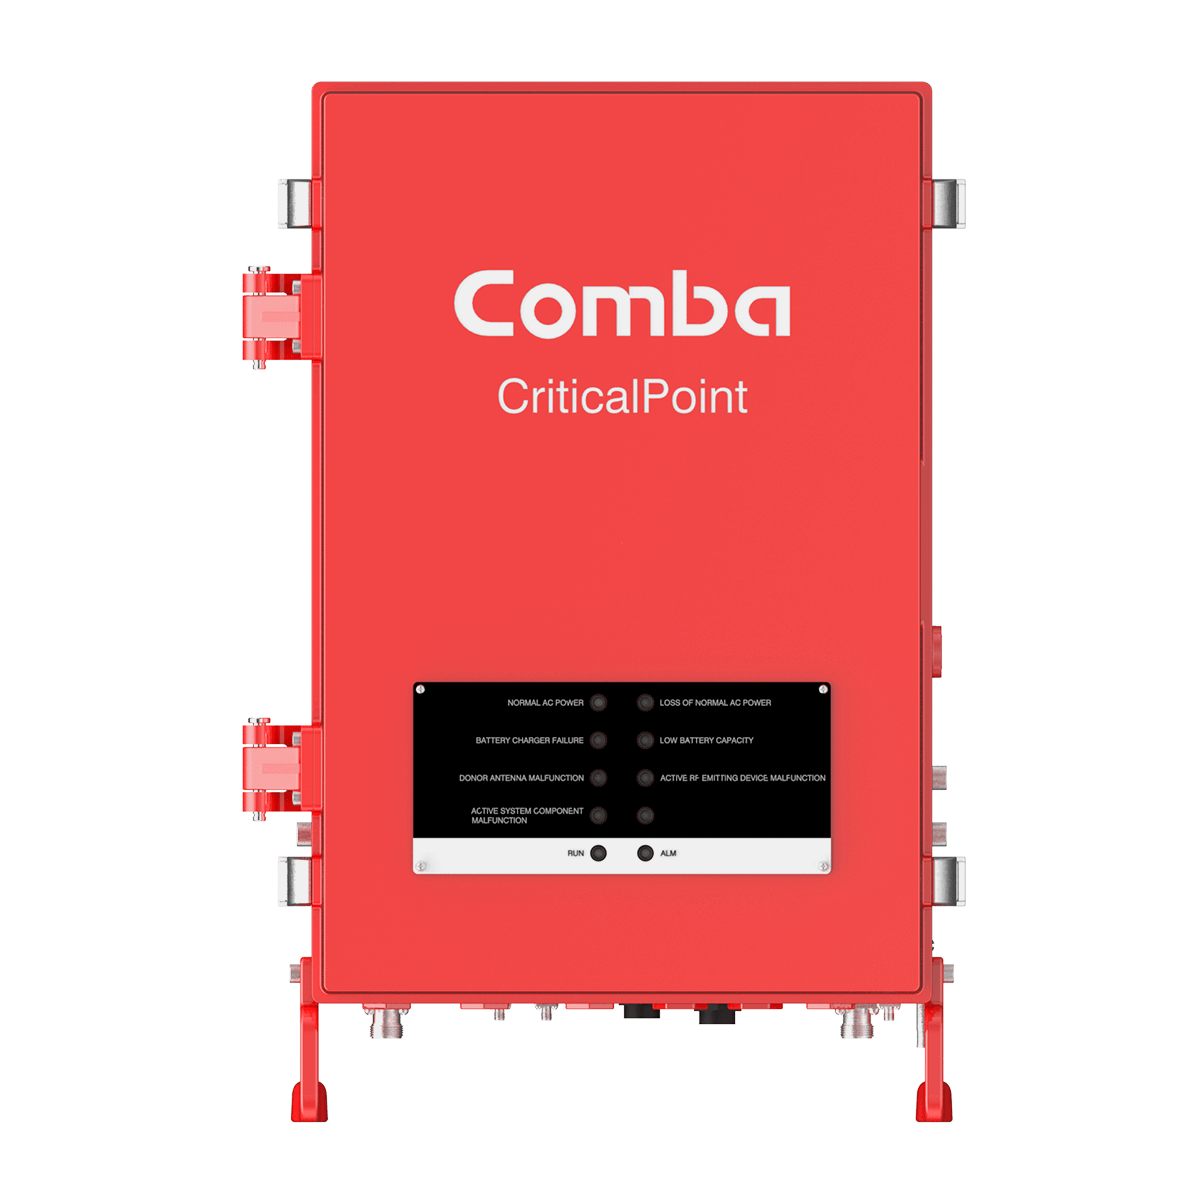 Original Image: Comba – Public Safety Critical Point NG 800MHz Single Band, Class A, 0.5W Remote Unit, S1 configuration, HCAI OSP listed